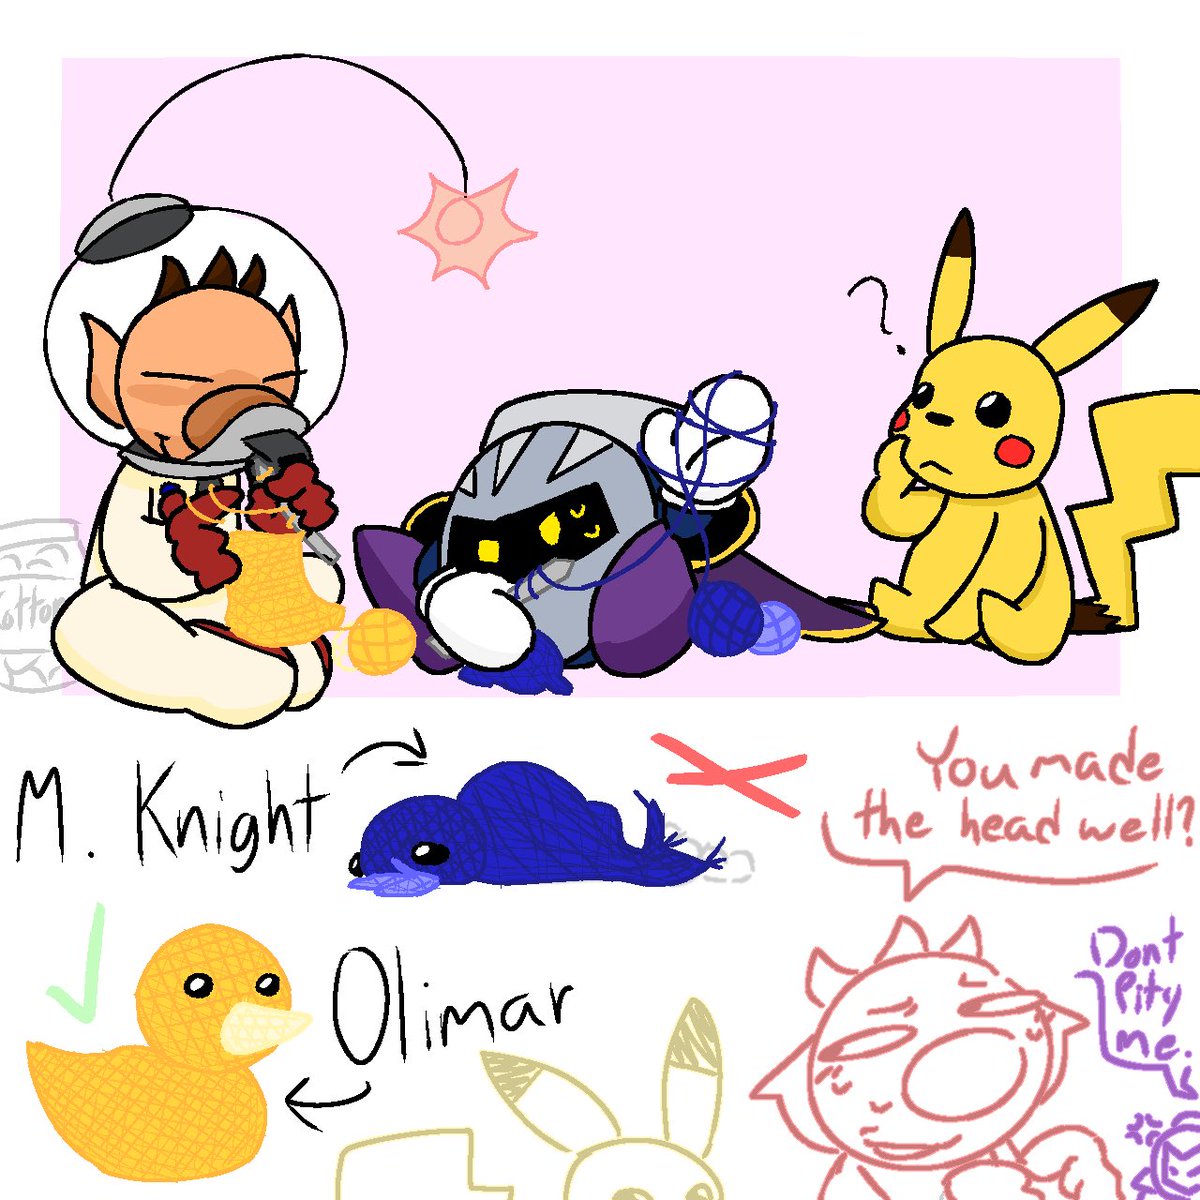 Olimar and MK knitting on a not date (+ pikachu) #SmashBros